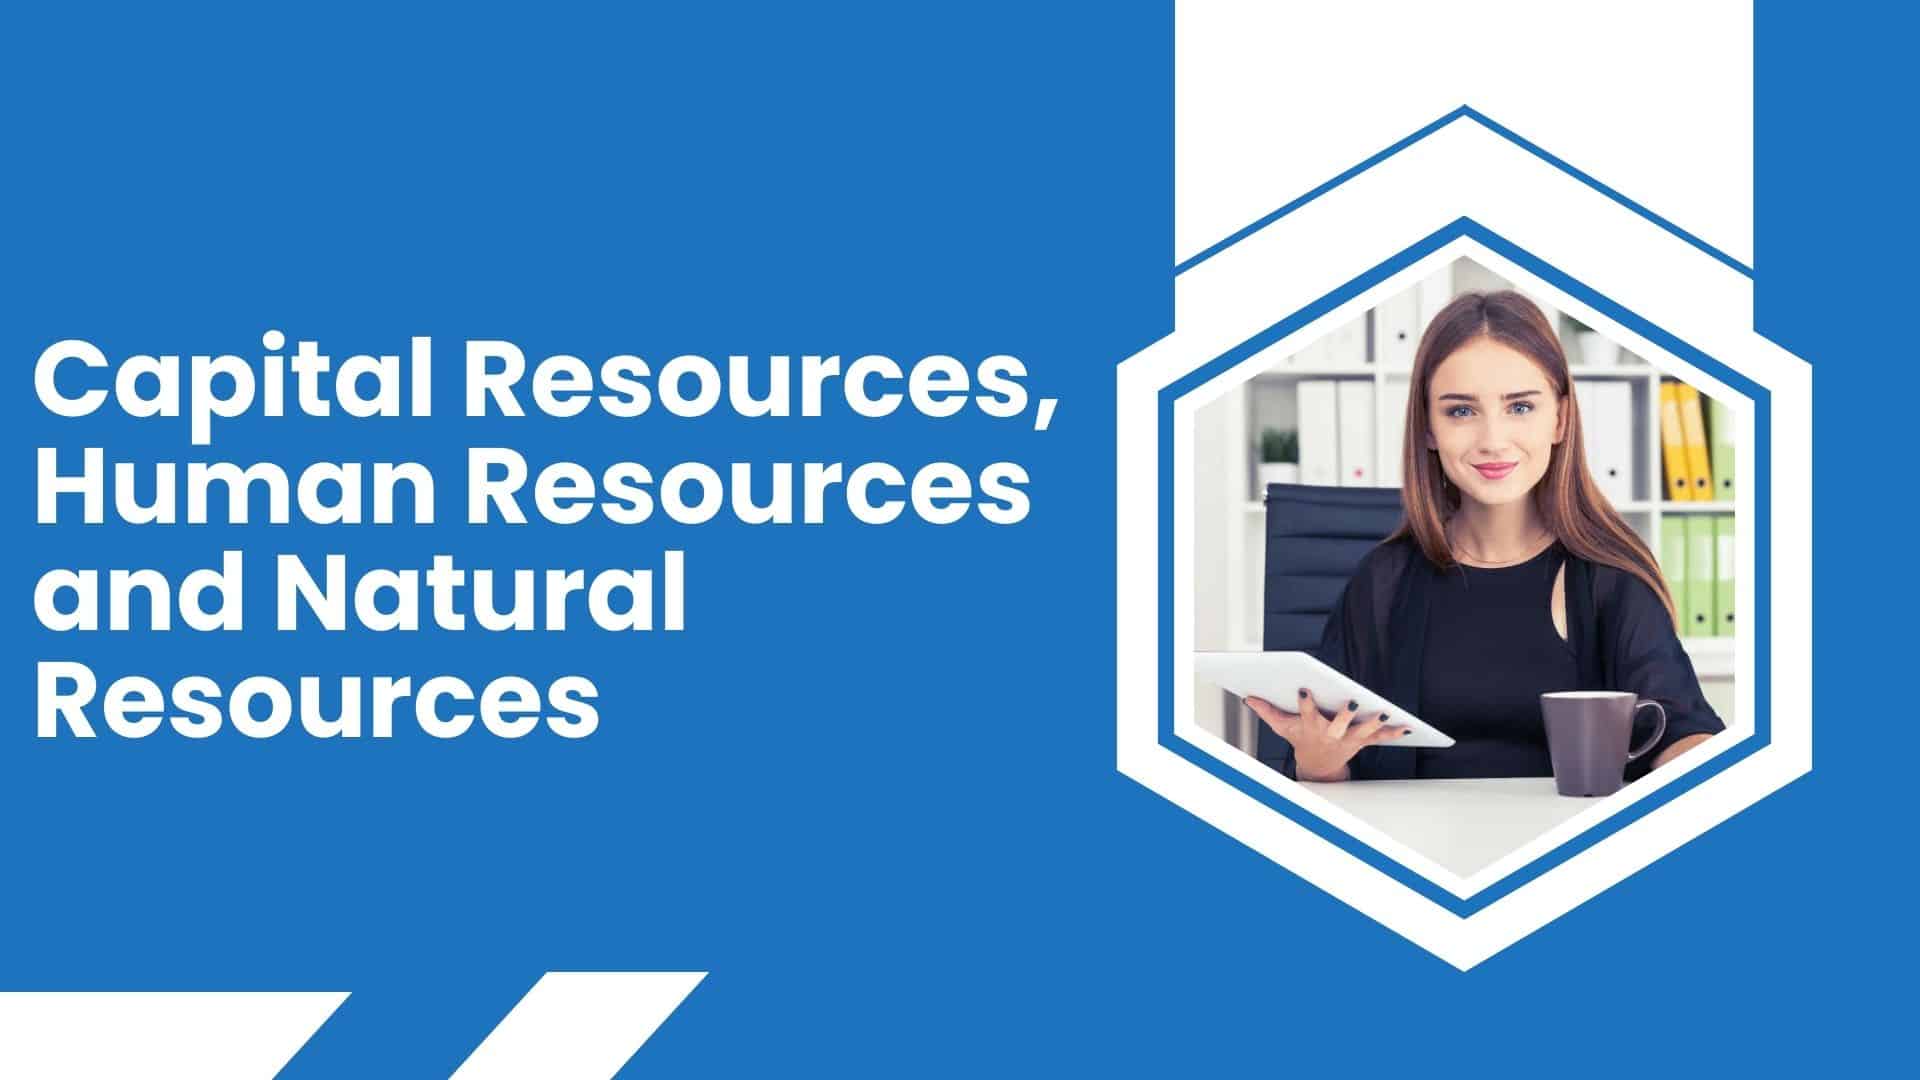 Capital Resources, Human Resources & Natural Resources